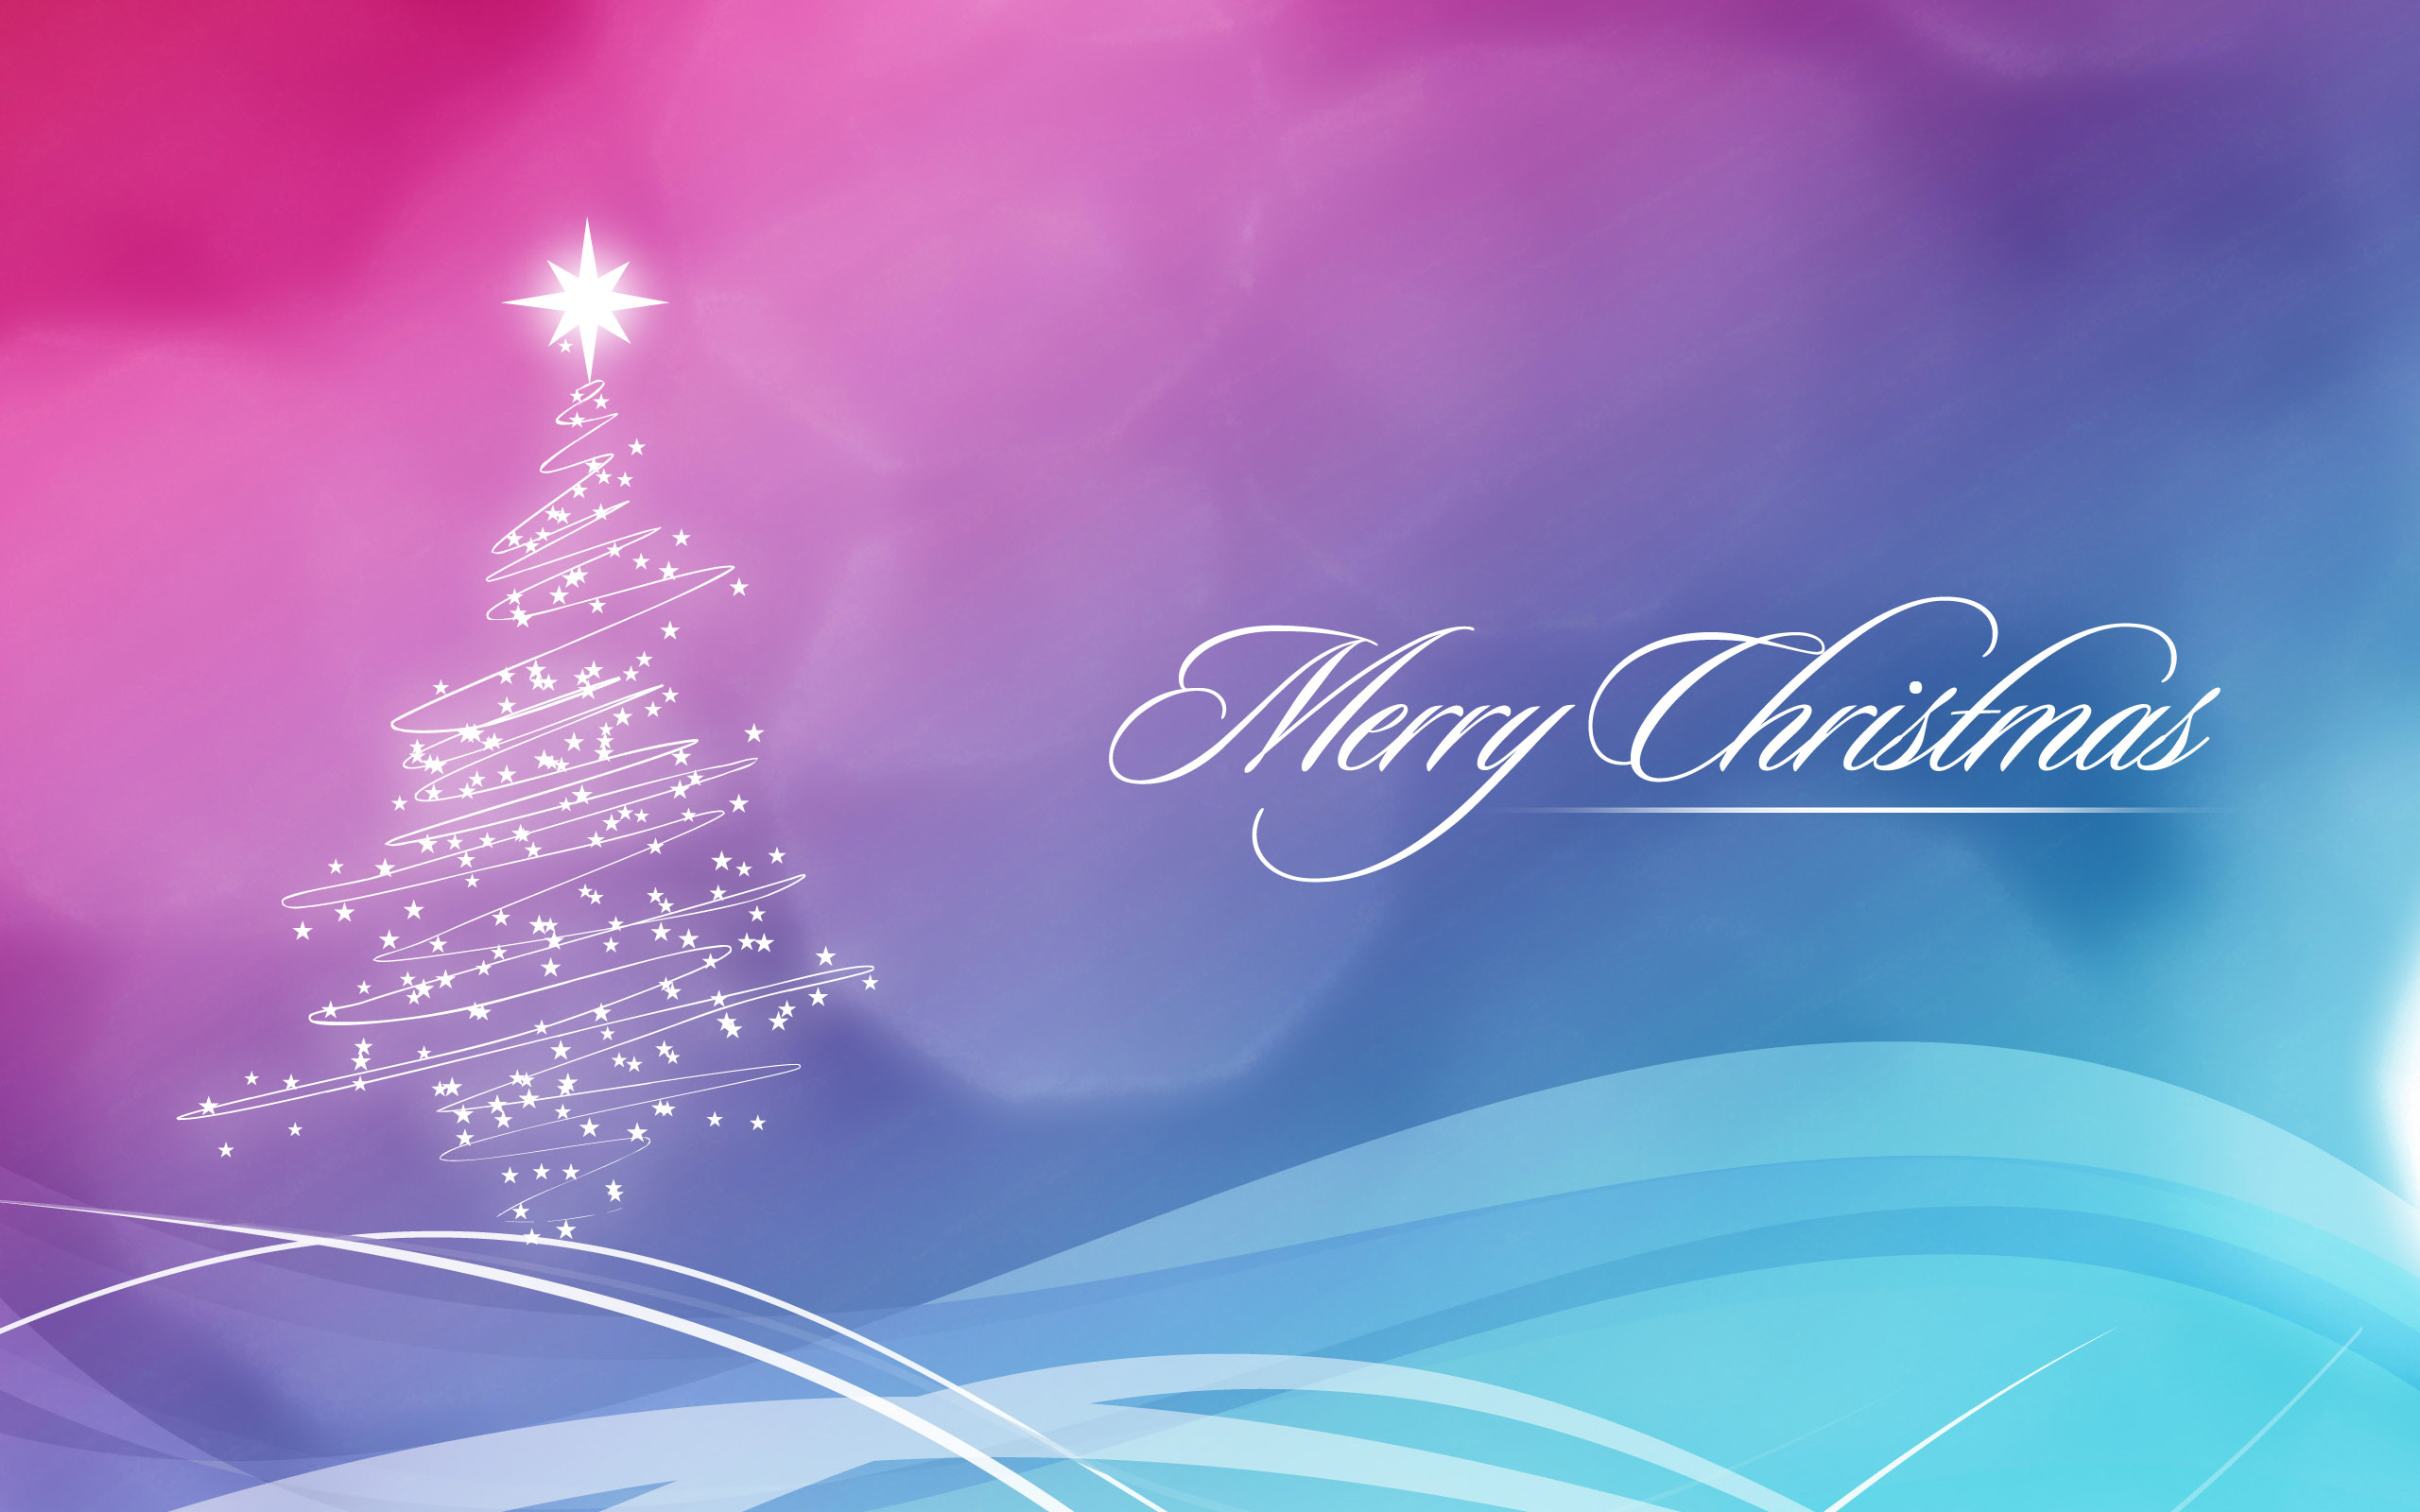 2015 Christmas computer background pictures - wallpapers, photos